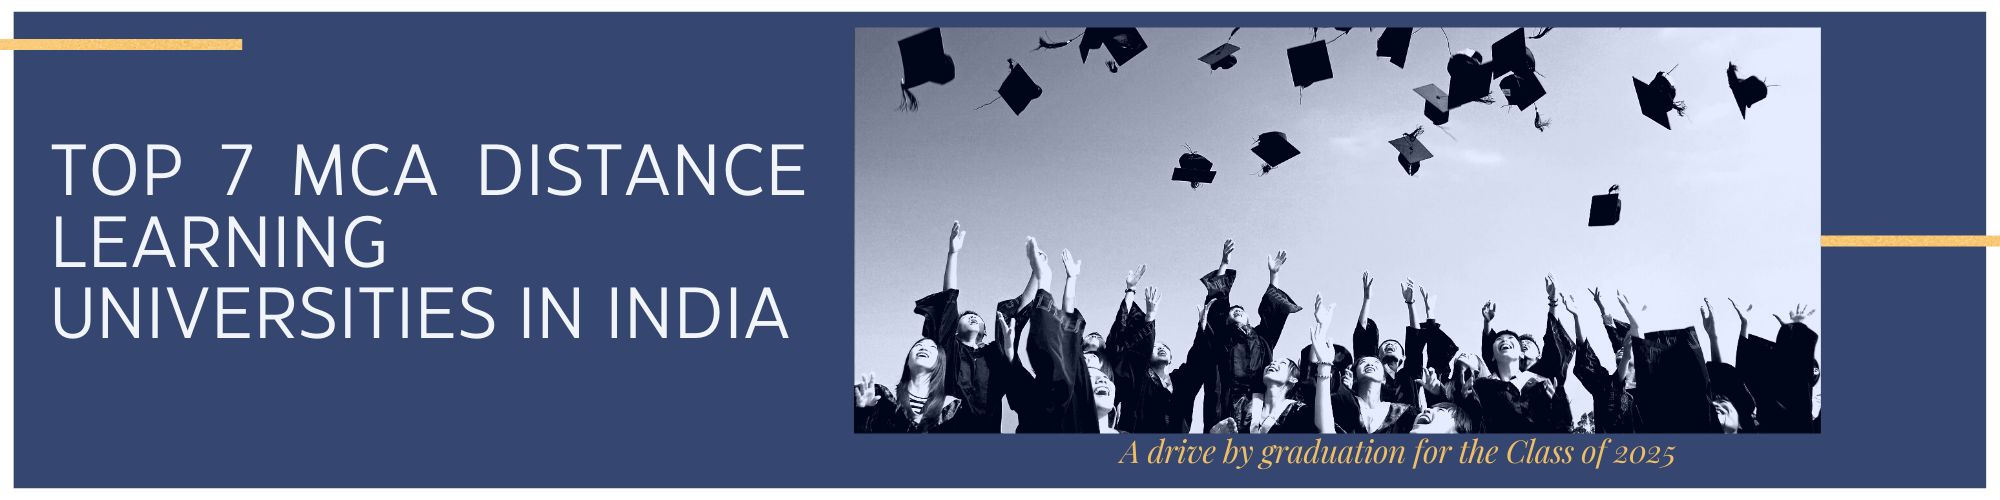 Top 7 MCA Distance Learning Universities in India